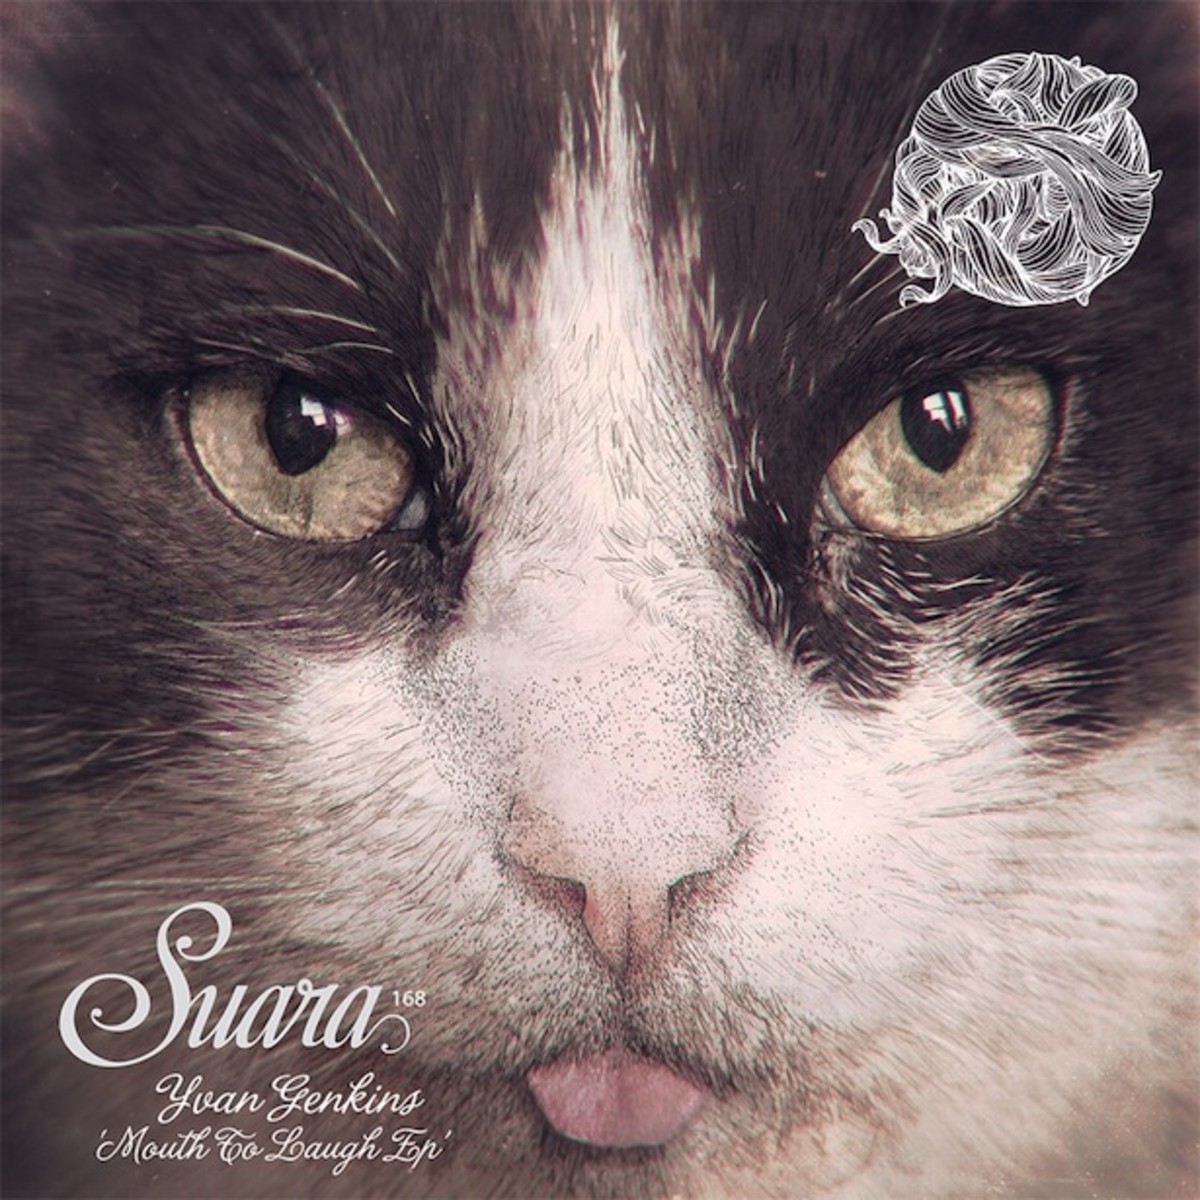 Exclusive Premiere: Yvan Genkins - Mouth To Laugh EP on Suara